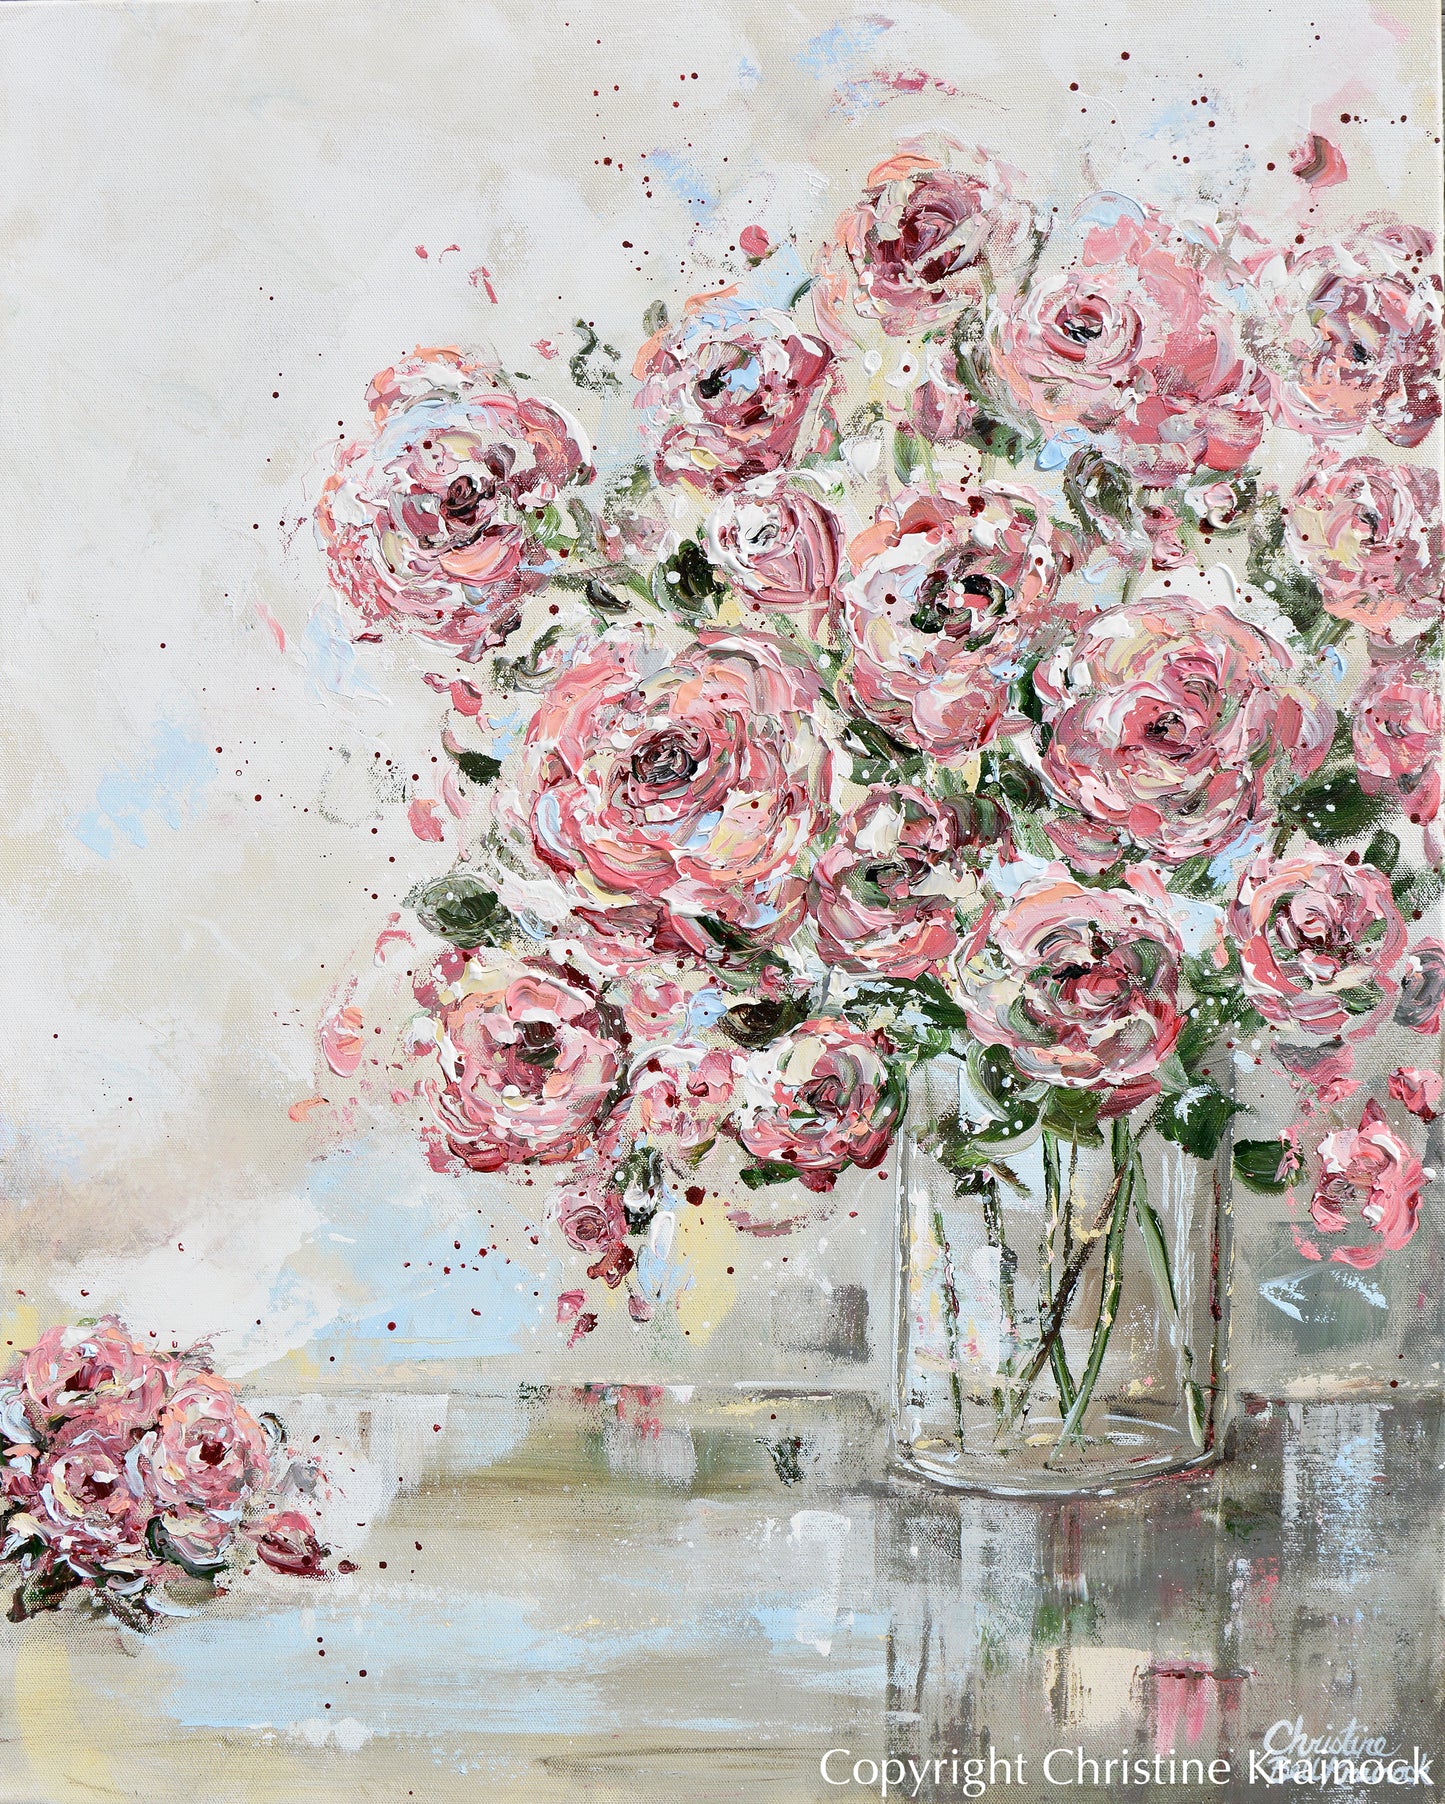 ORIGINAL Art Abstract Floral Painting Textured Pink Flowers Bouquet Roses Wall Decor 24x30"